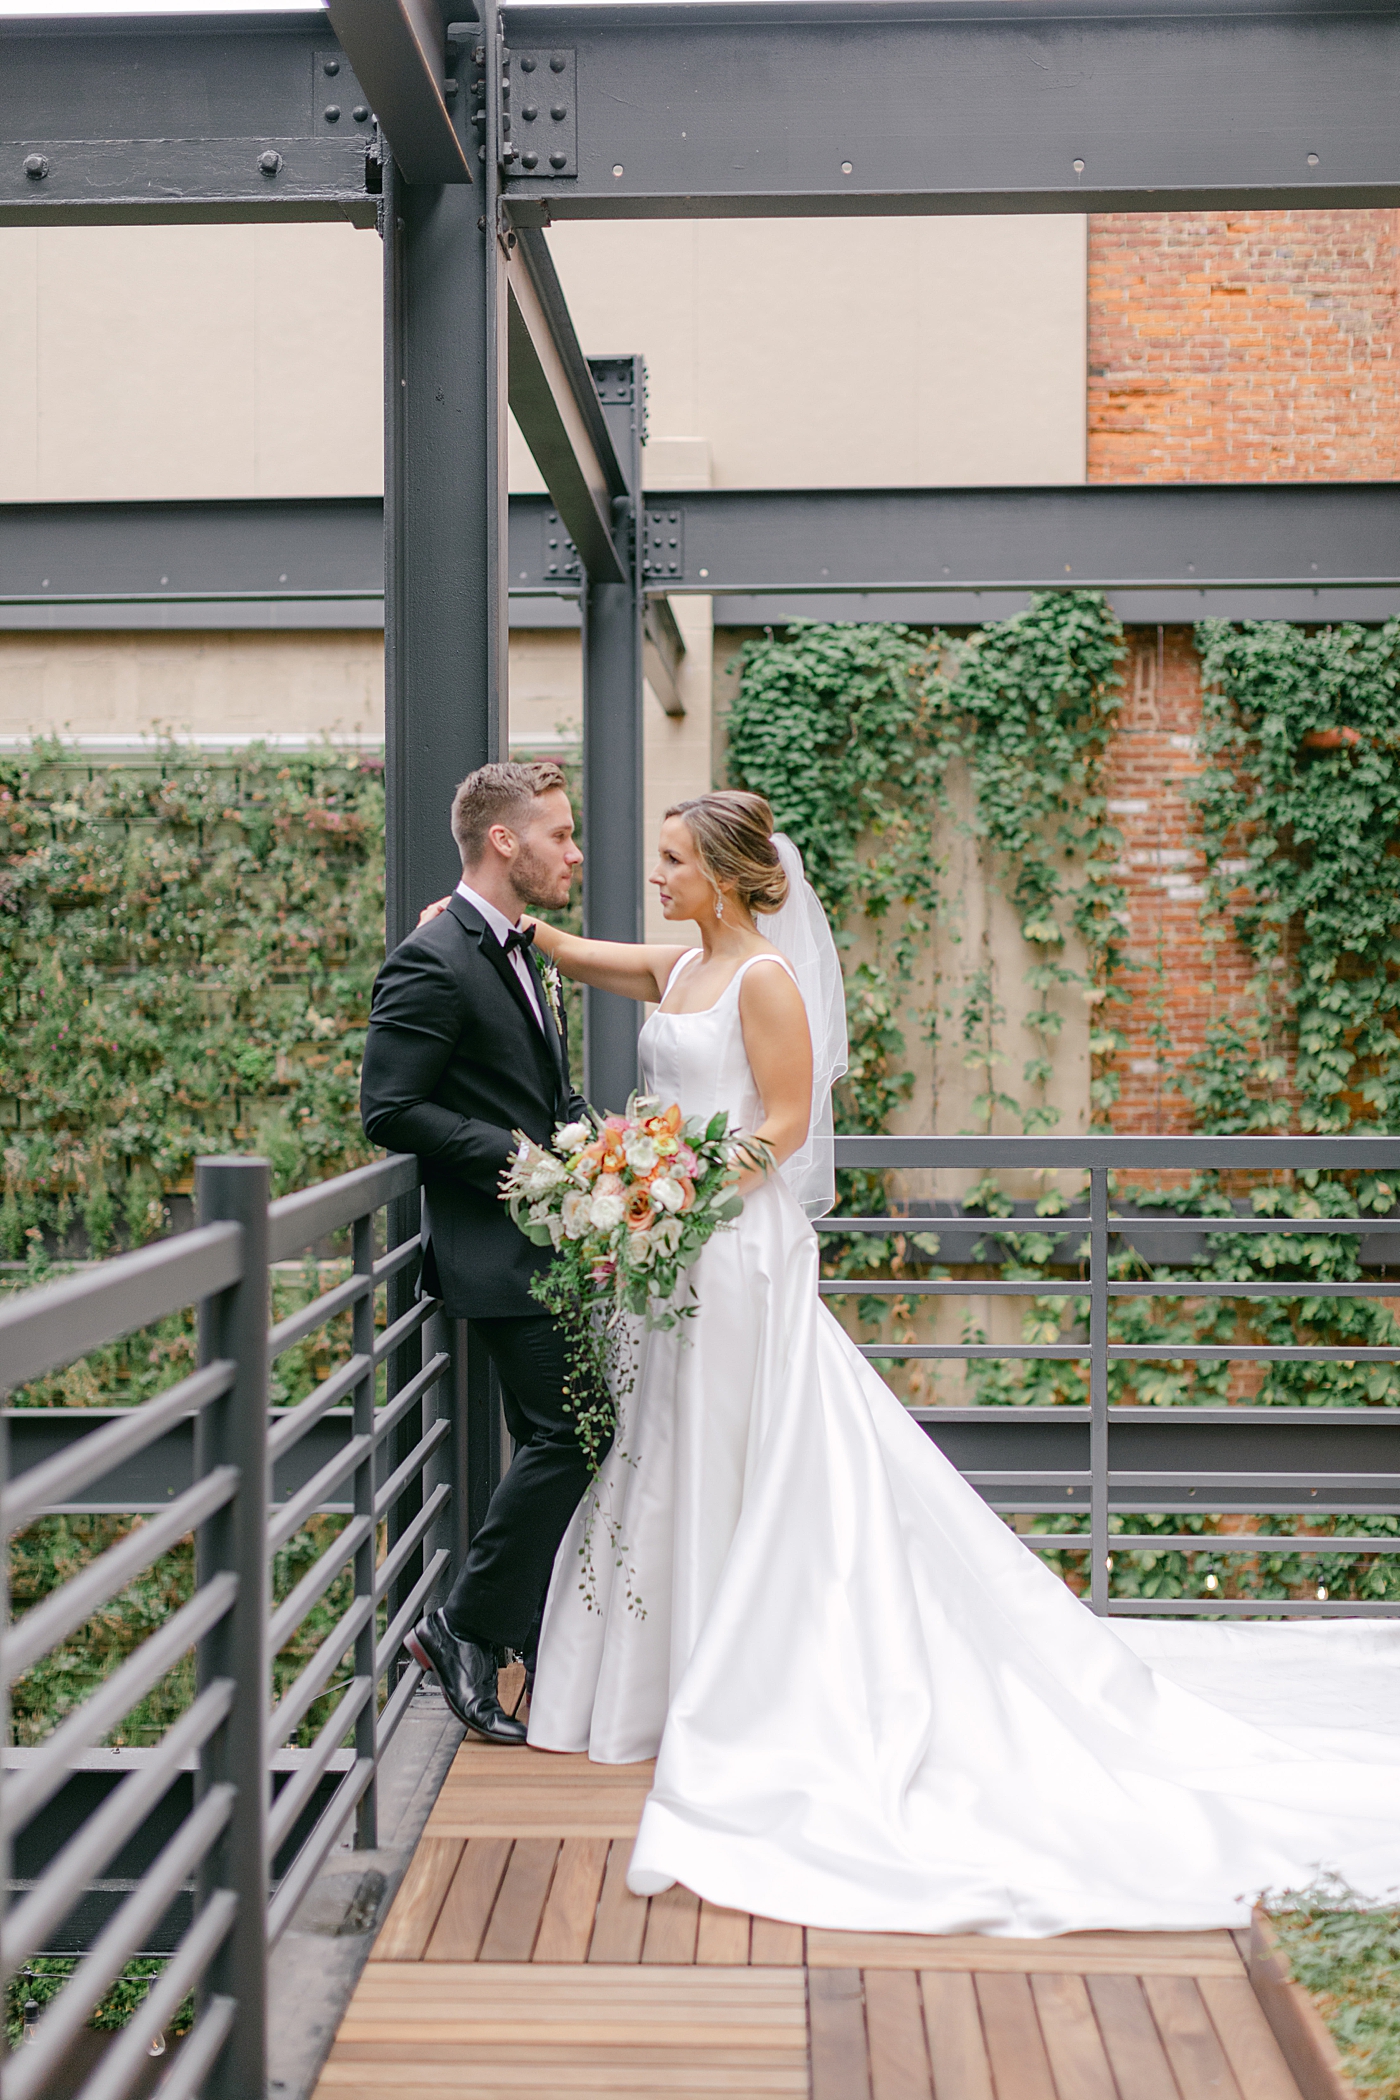 Bride and groom portraits on a terrace | Excelsior PA Wedding Photography by Hope Helmuth Photography